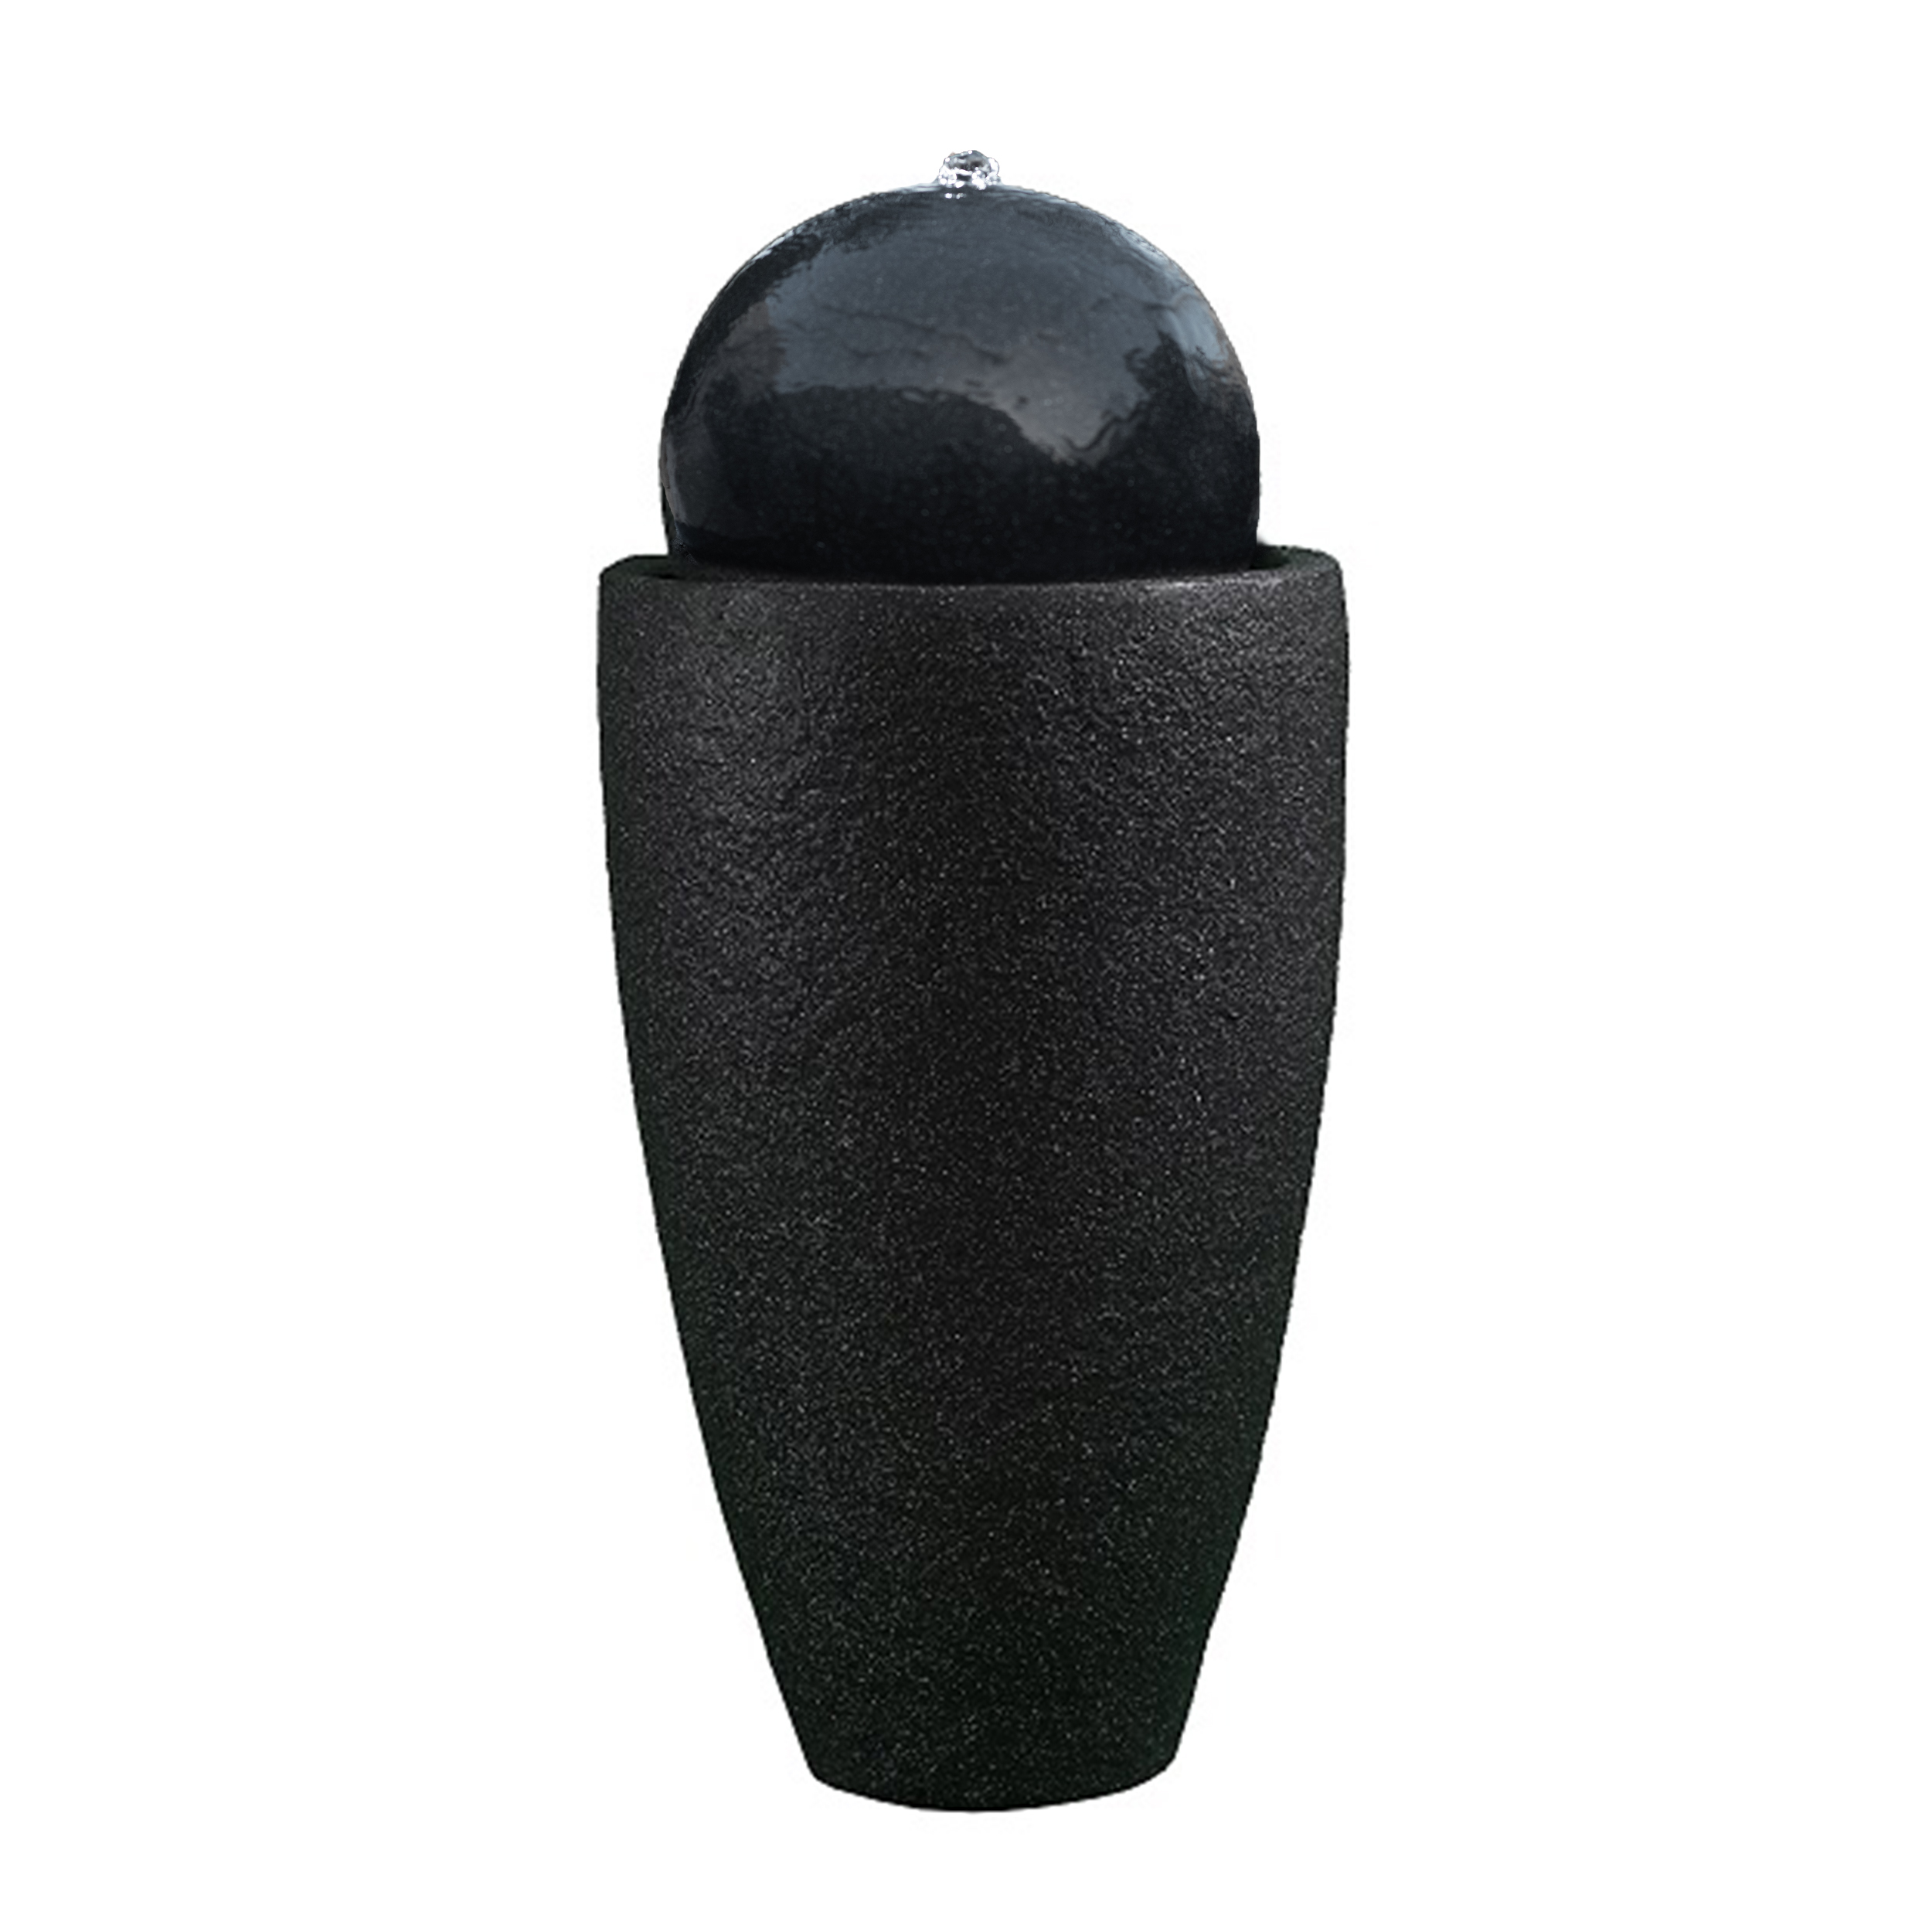 Shop our modern black fountains - round, sphere & tall outdoor designs. Enhance indoor/outdoor décor with water features & elevate your garden décor.